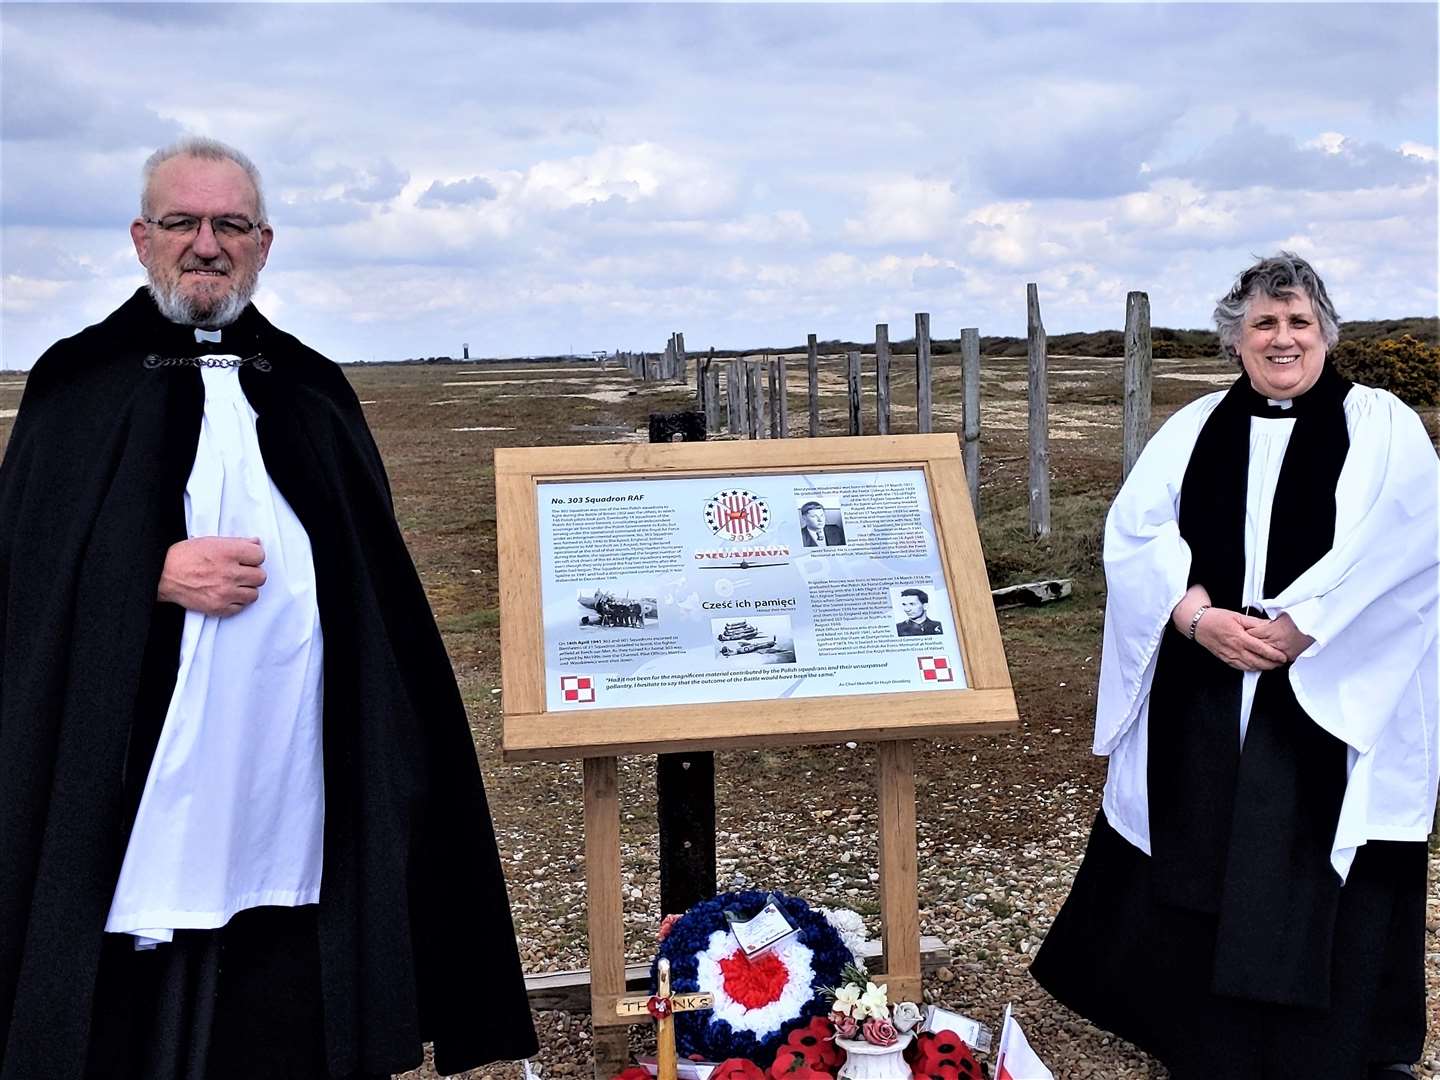 The Vicar of Lydd, Chris Maclean, and his curate, Jacky Darling, unveiled the new plaque. Photo: EDF